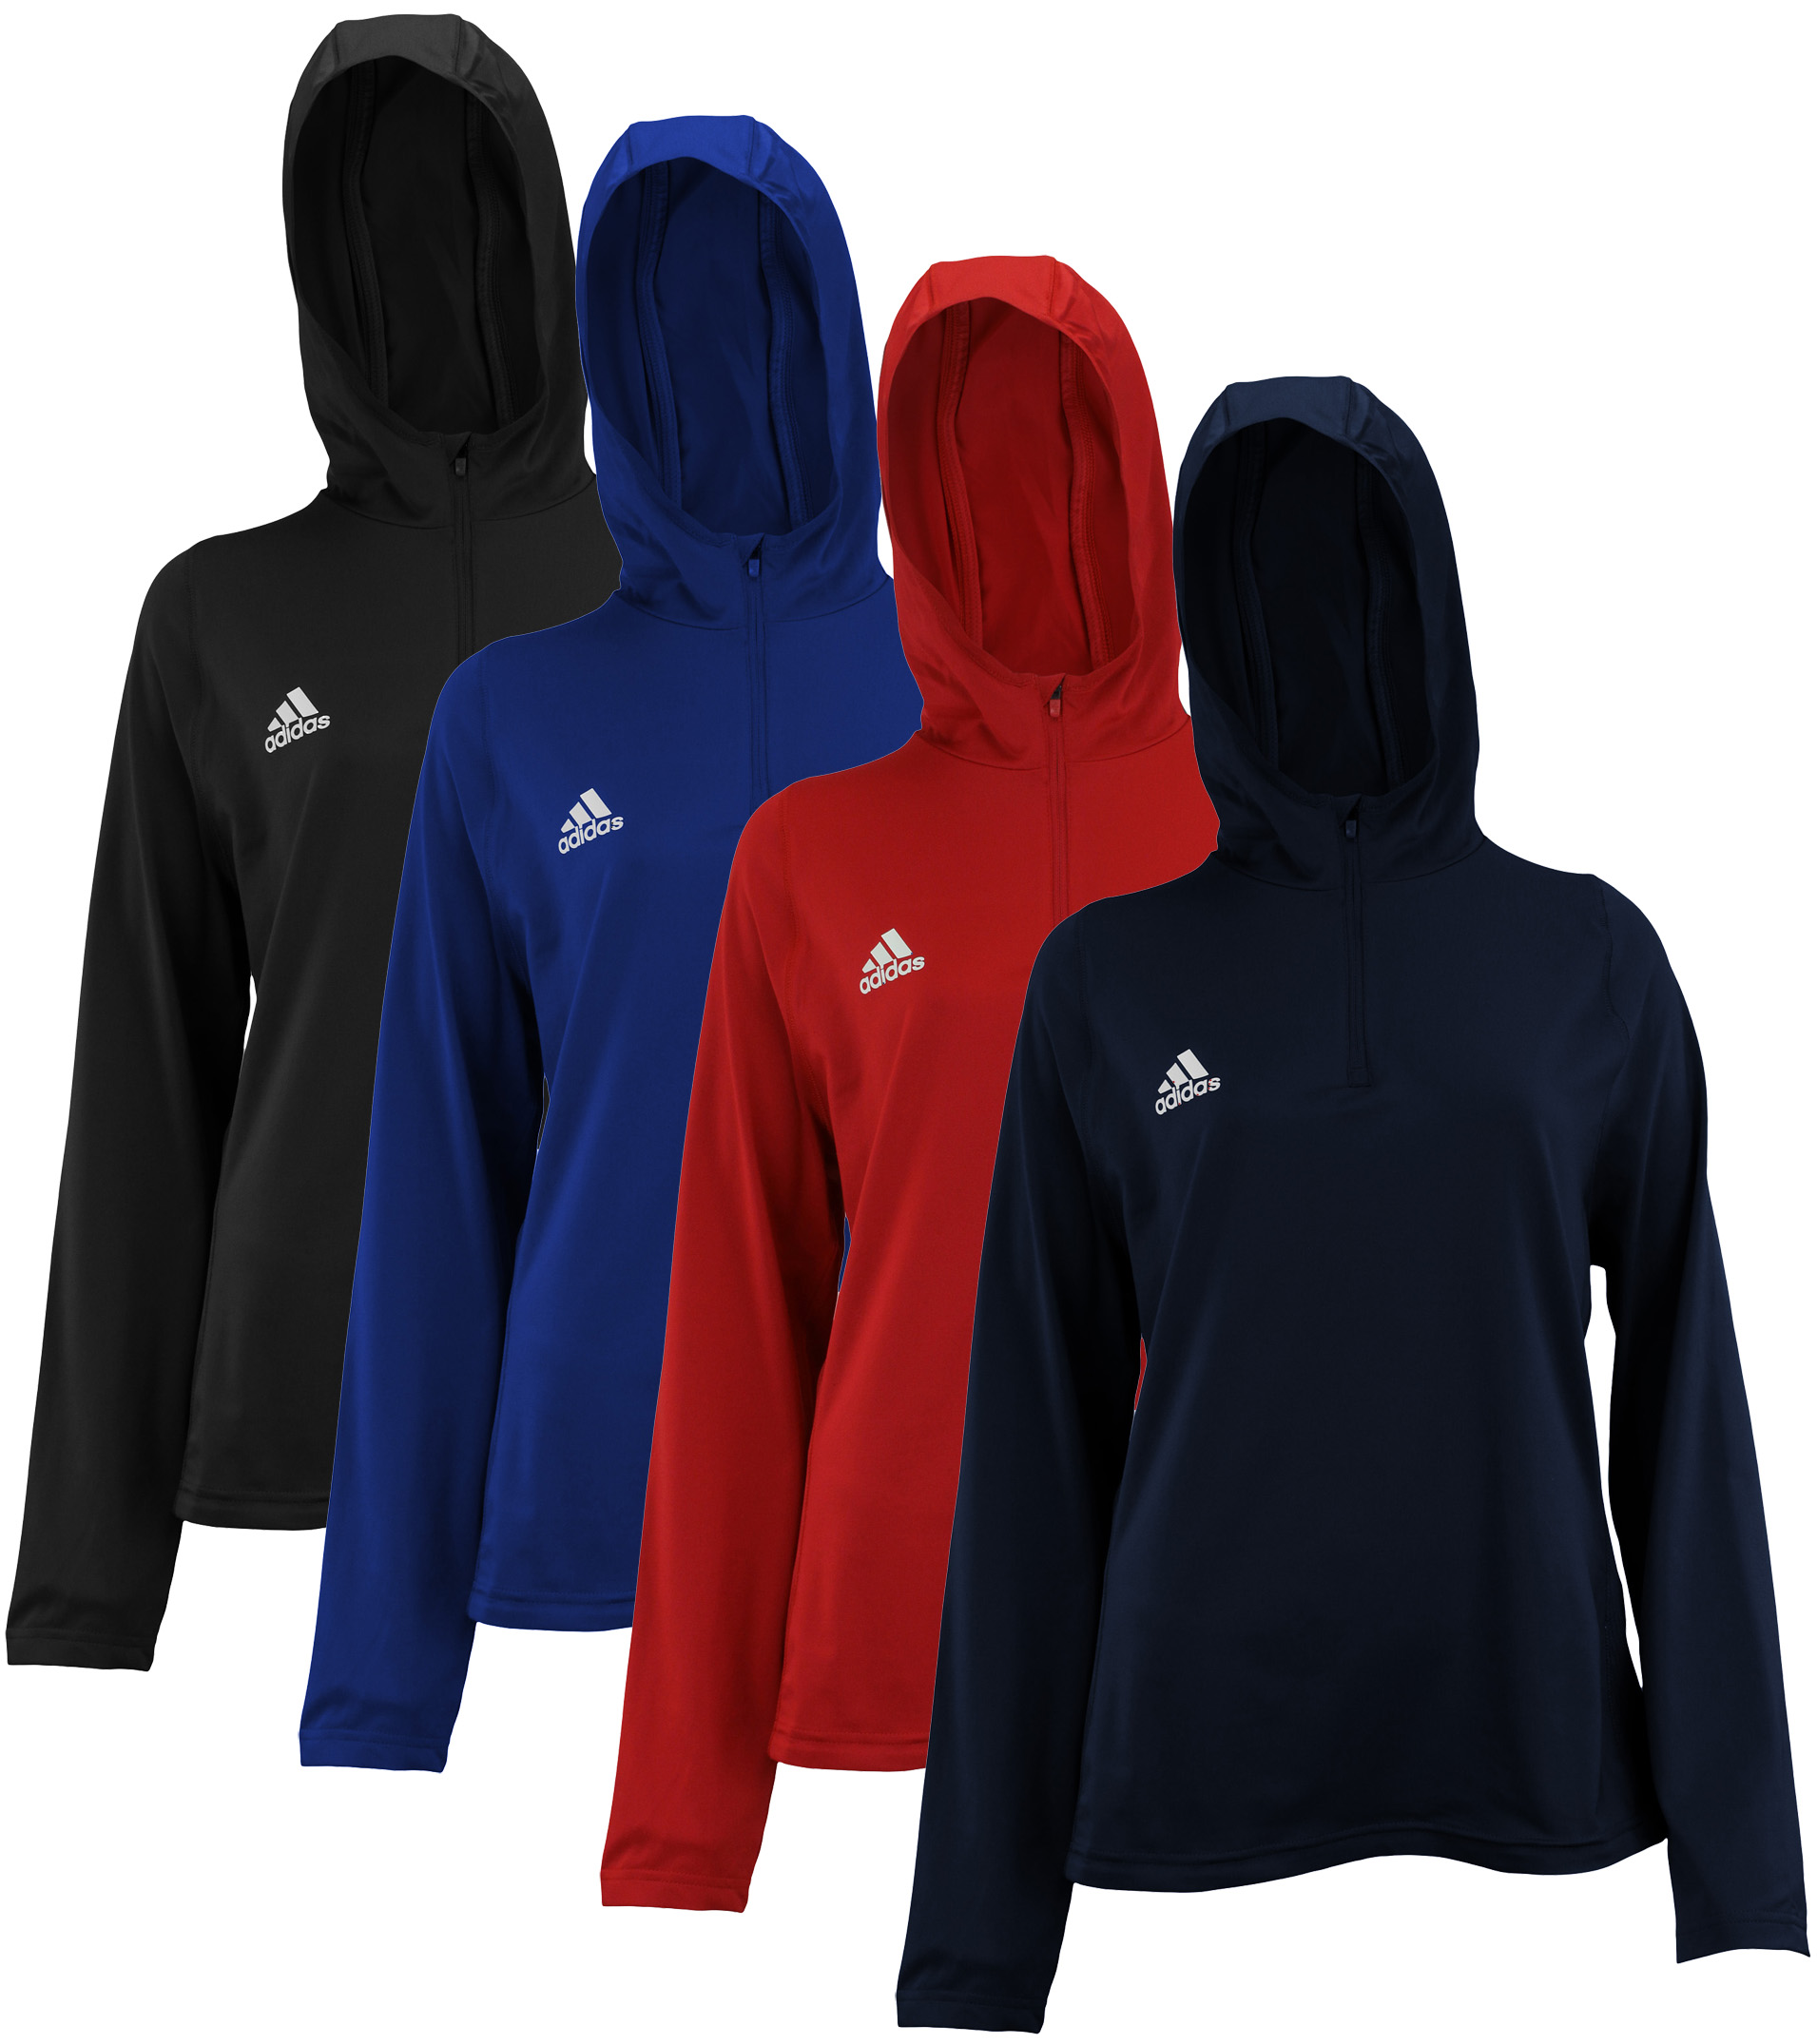 adidas sweater color